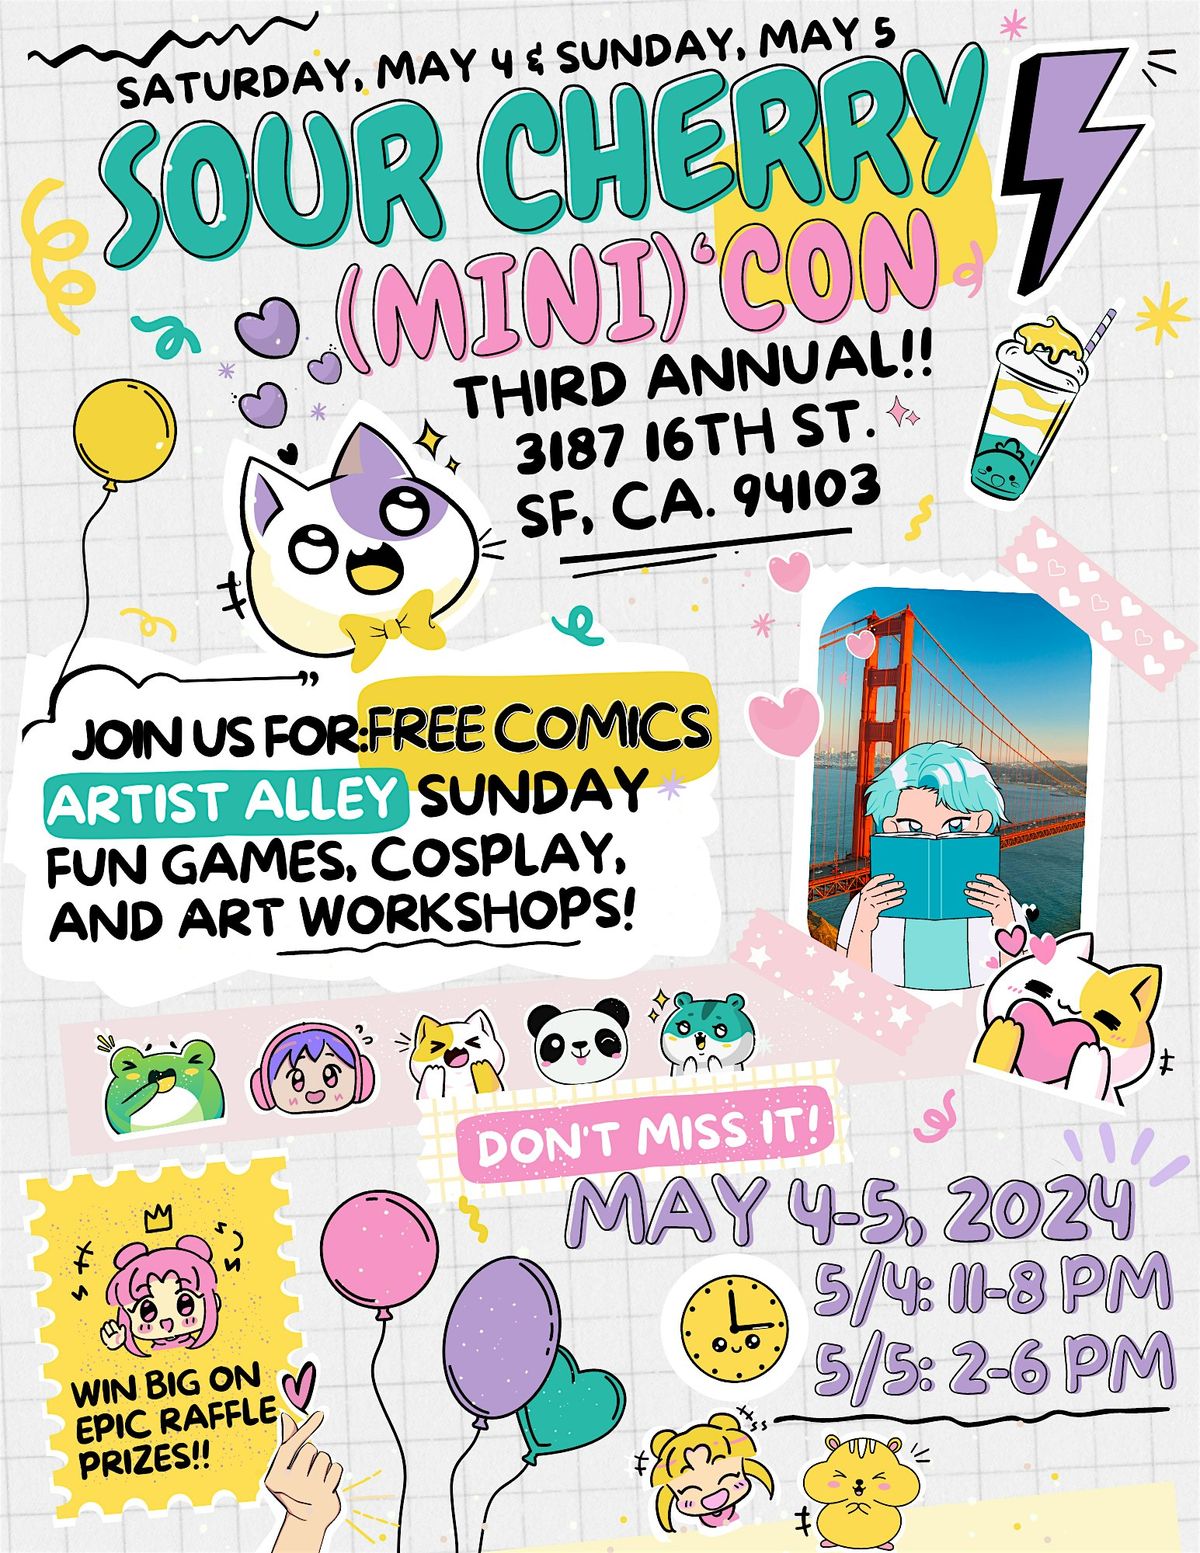 (3rd annual!) SOUR CHERRY CON!!! MAY 4 + 5